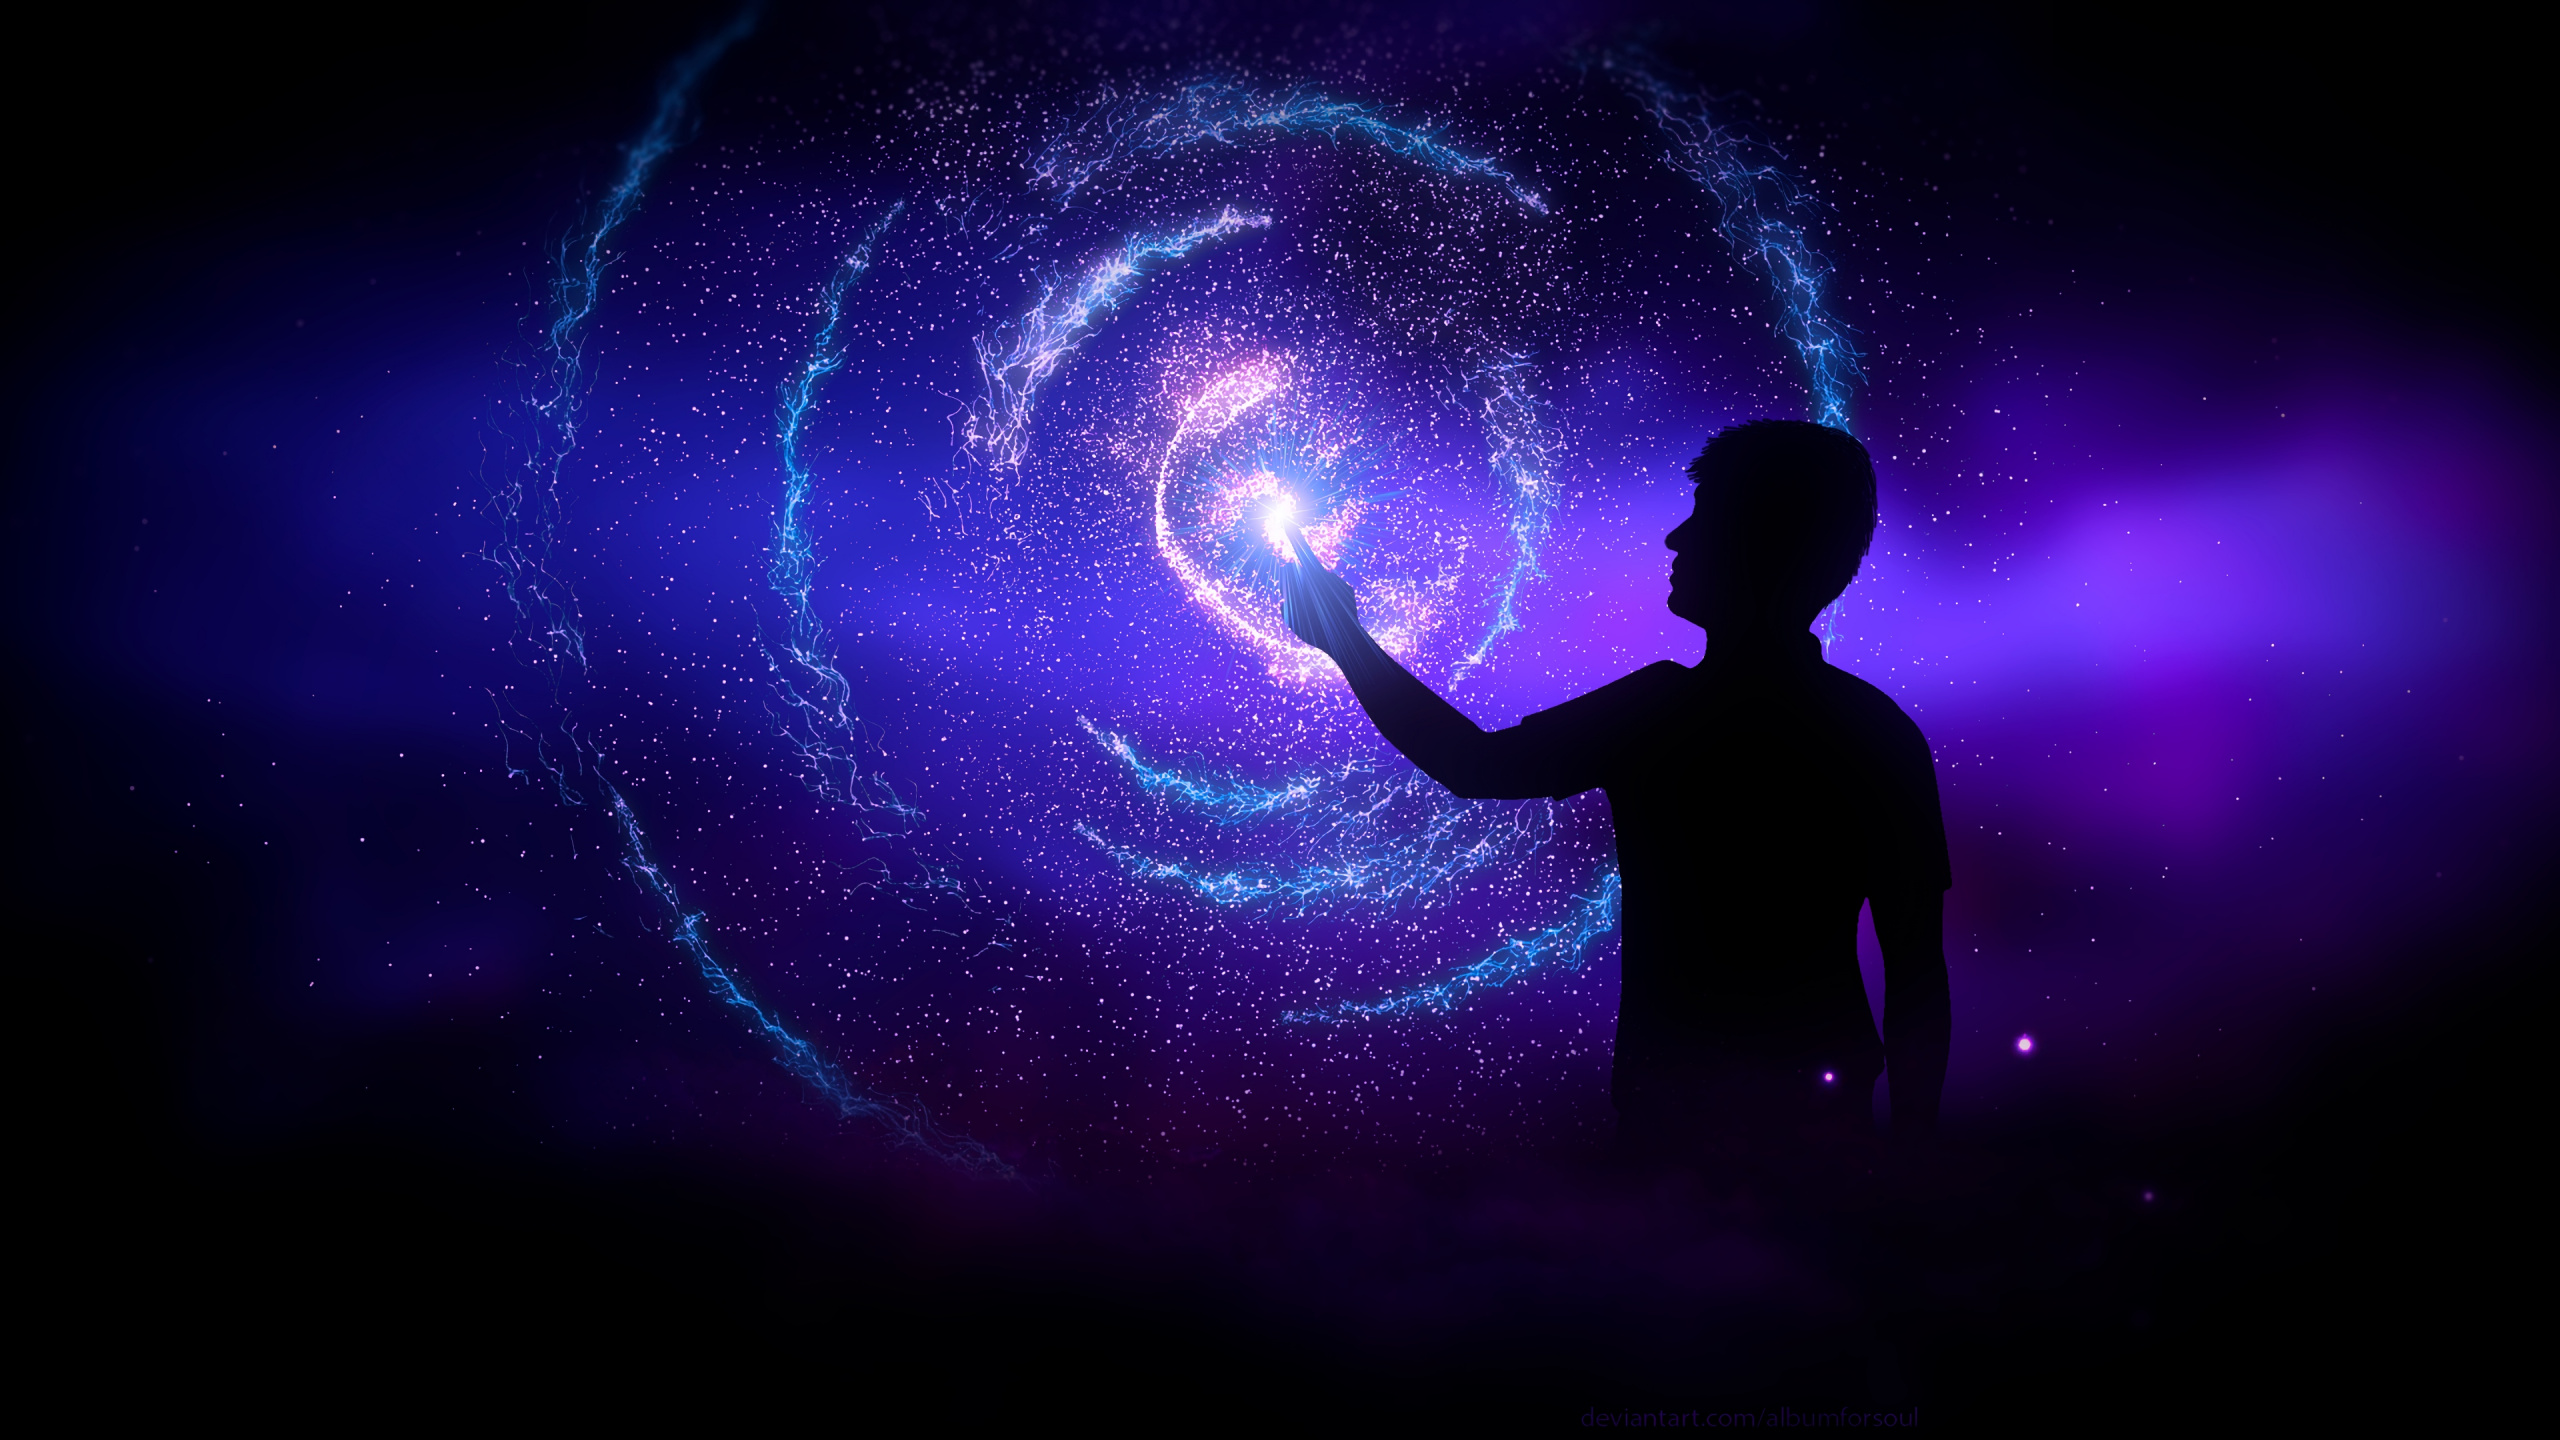 Silhouette of Man Standing in Front of Purple Light. Wallpaper in 2560x1440 Resolution